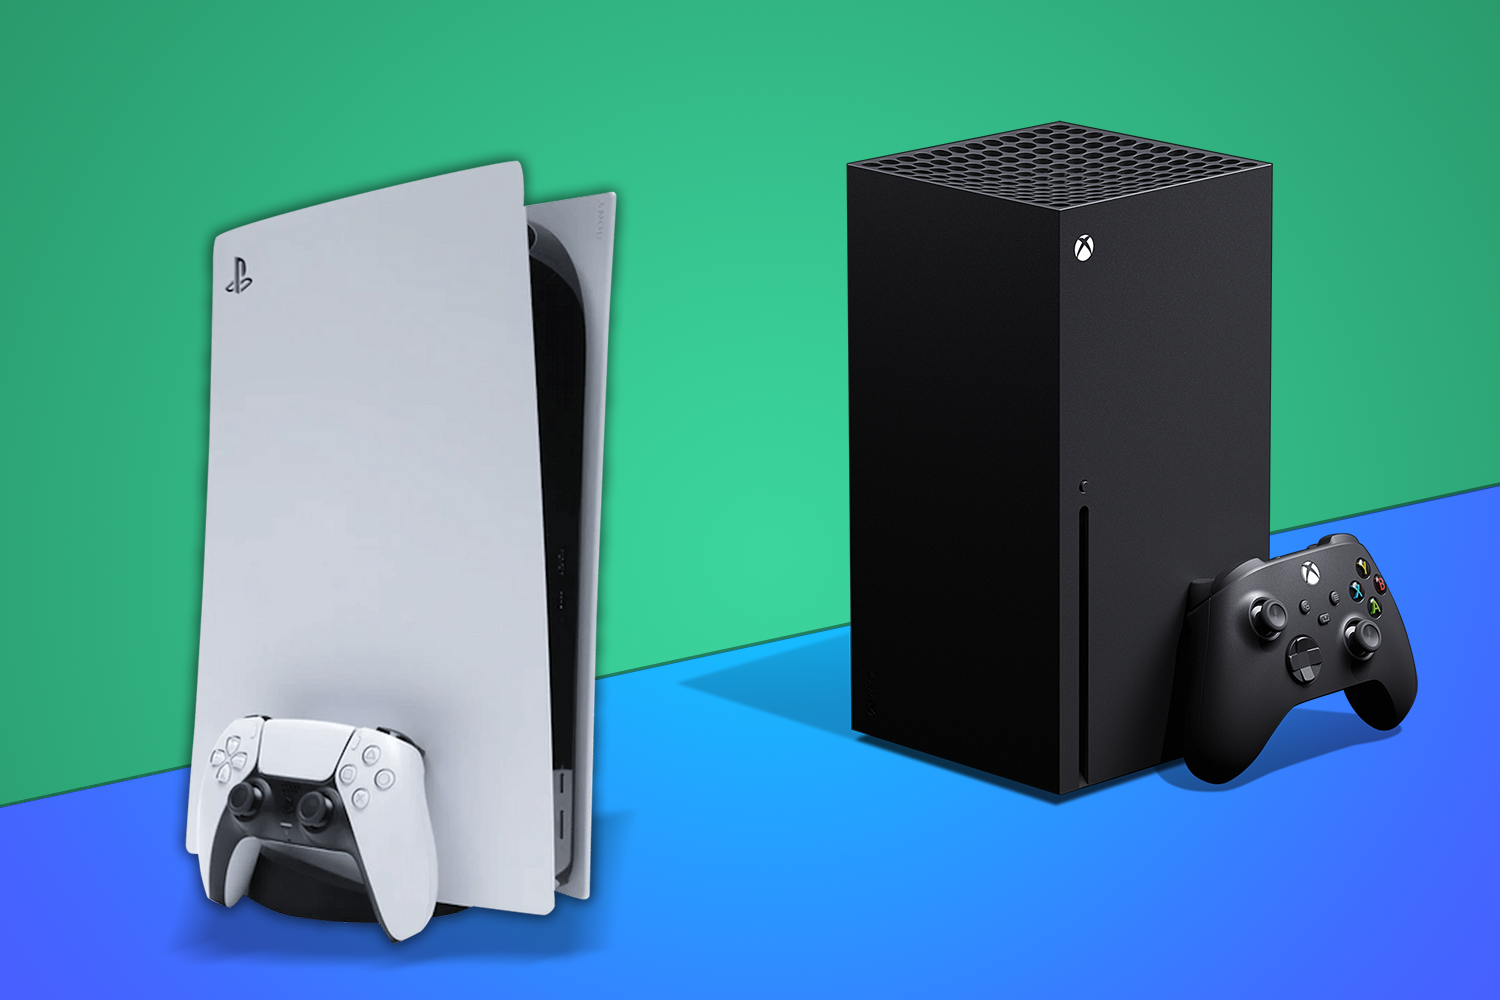 PS5 vs Xbox Series X: Which is the best console for gaming in 2023?